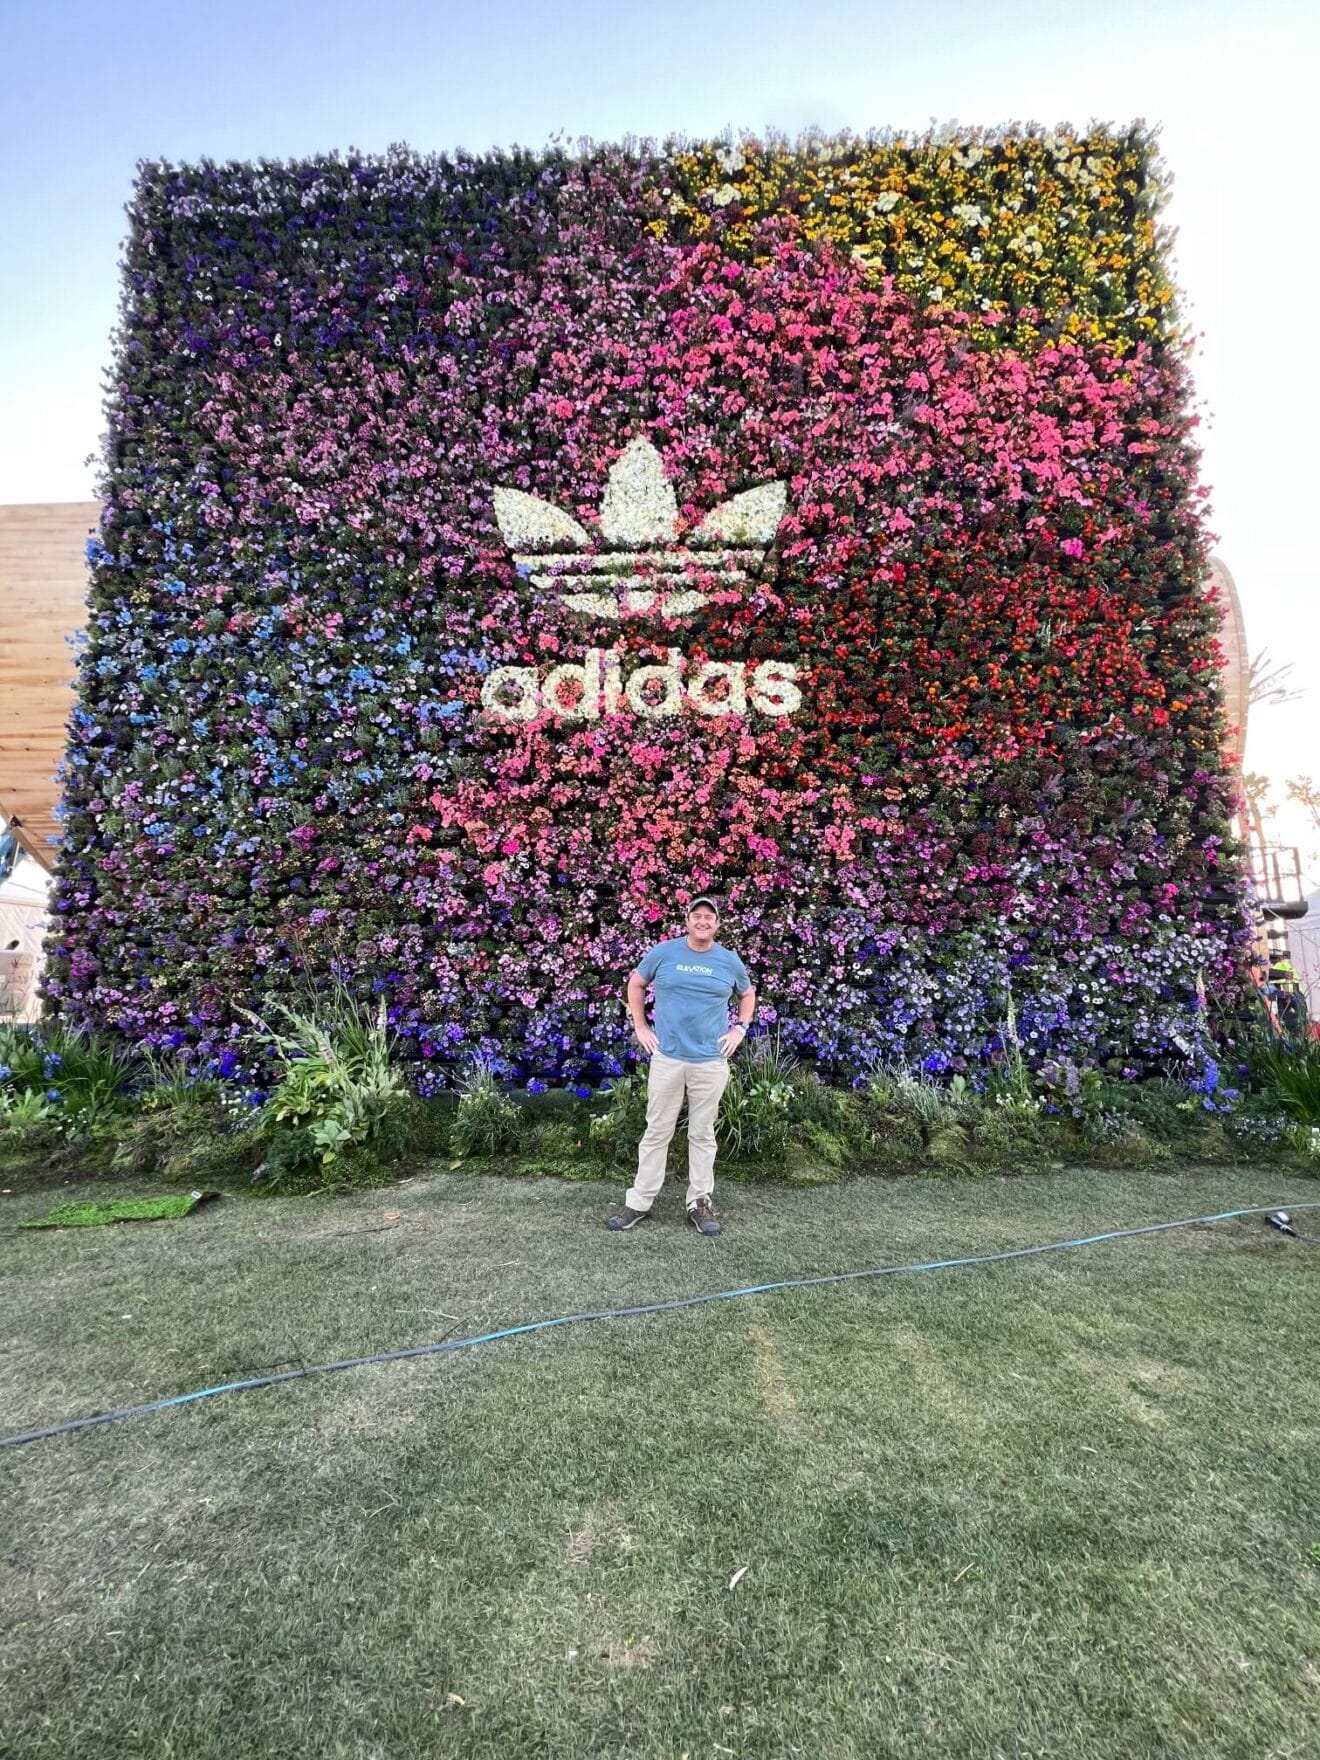 David at Coachella in front of the flower cube